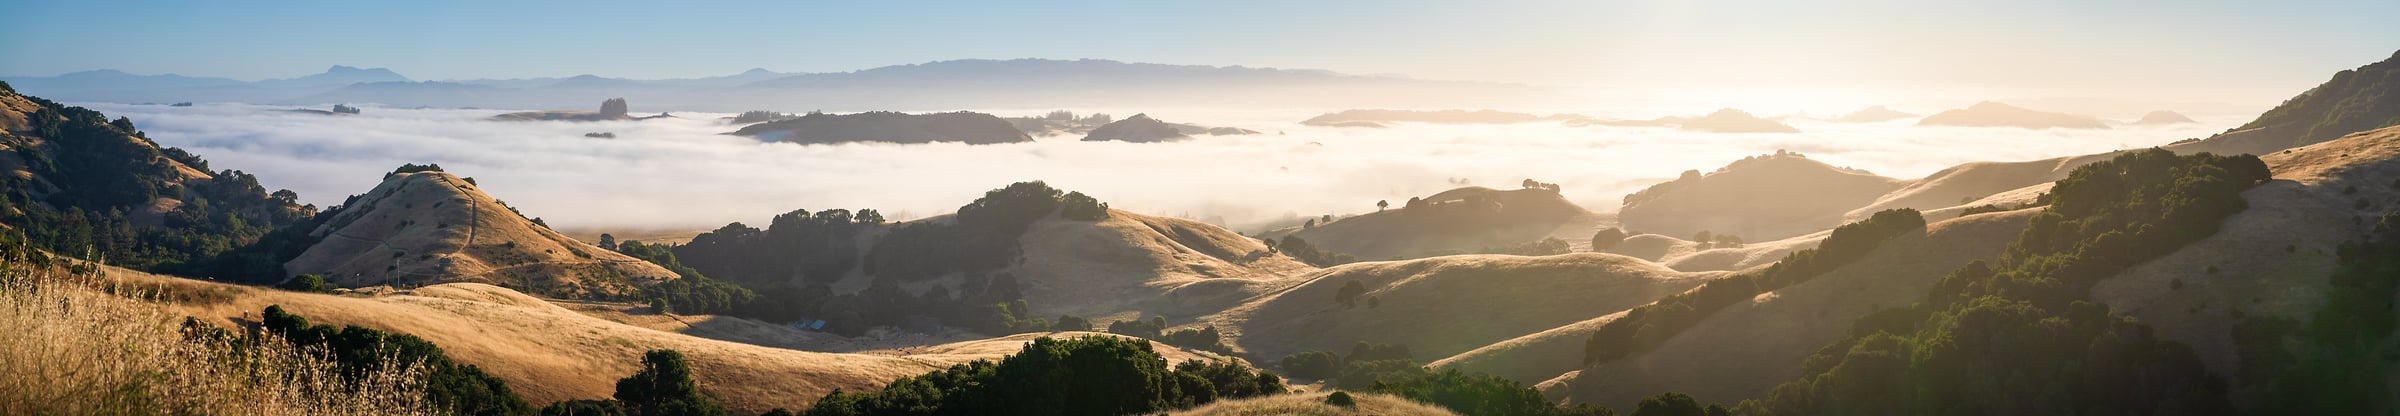 373 megapixels! A very high resolution, large-format VAST photo print of rolling hills at sunrise; panorama wallpaper photograph created by Jeff Lewis in Petaluma, California.